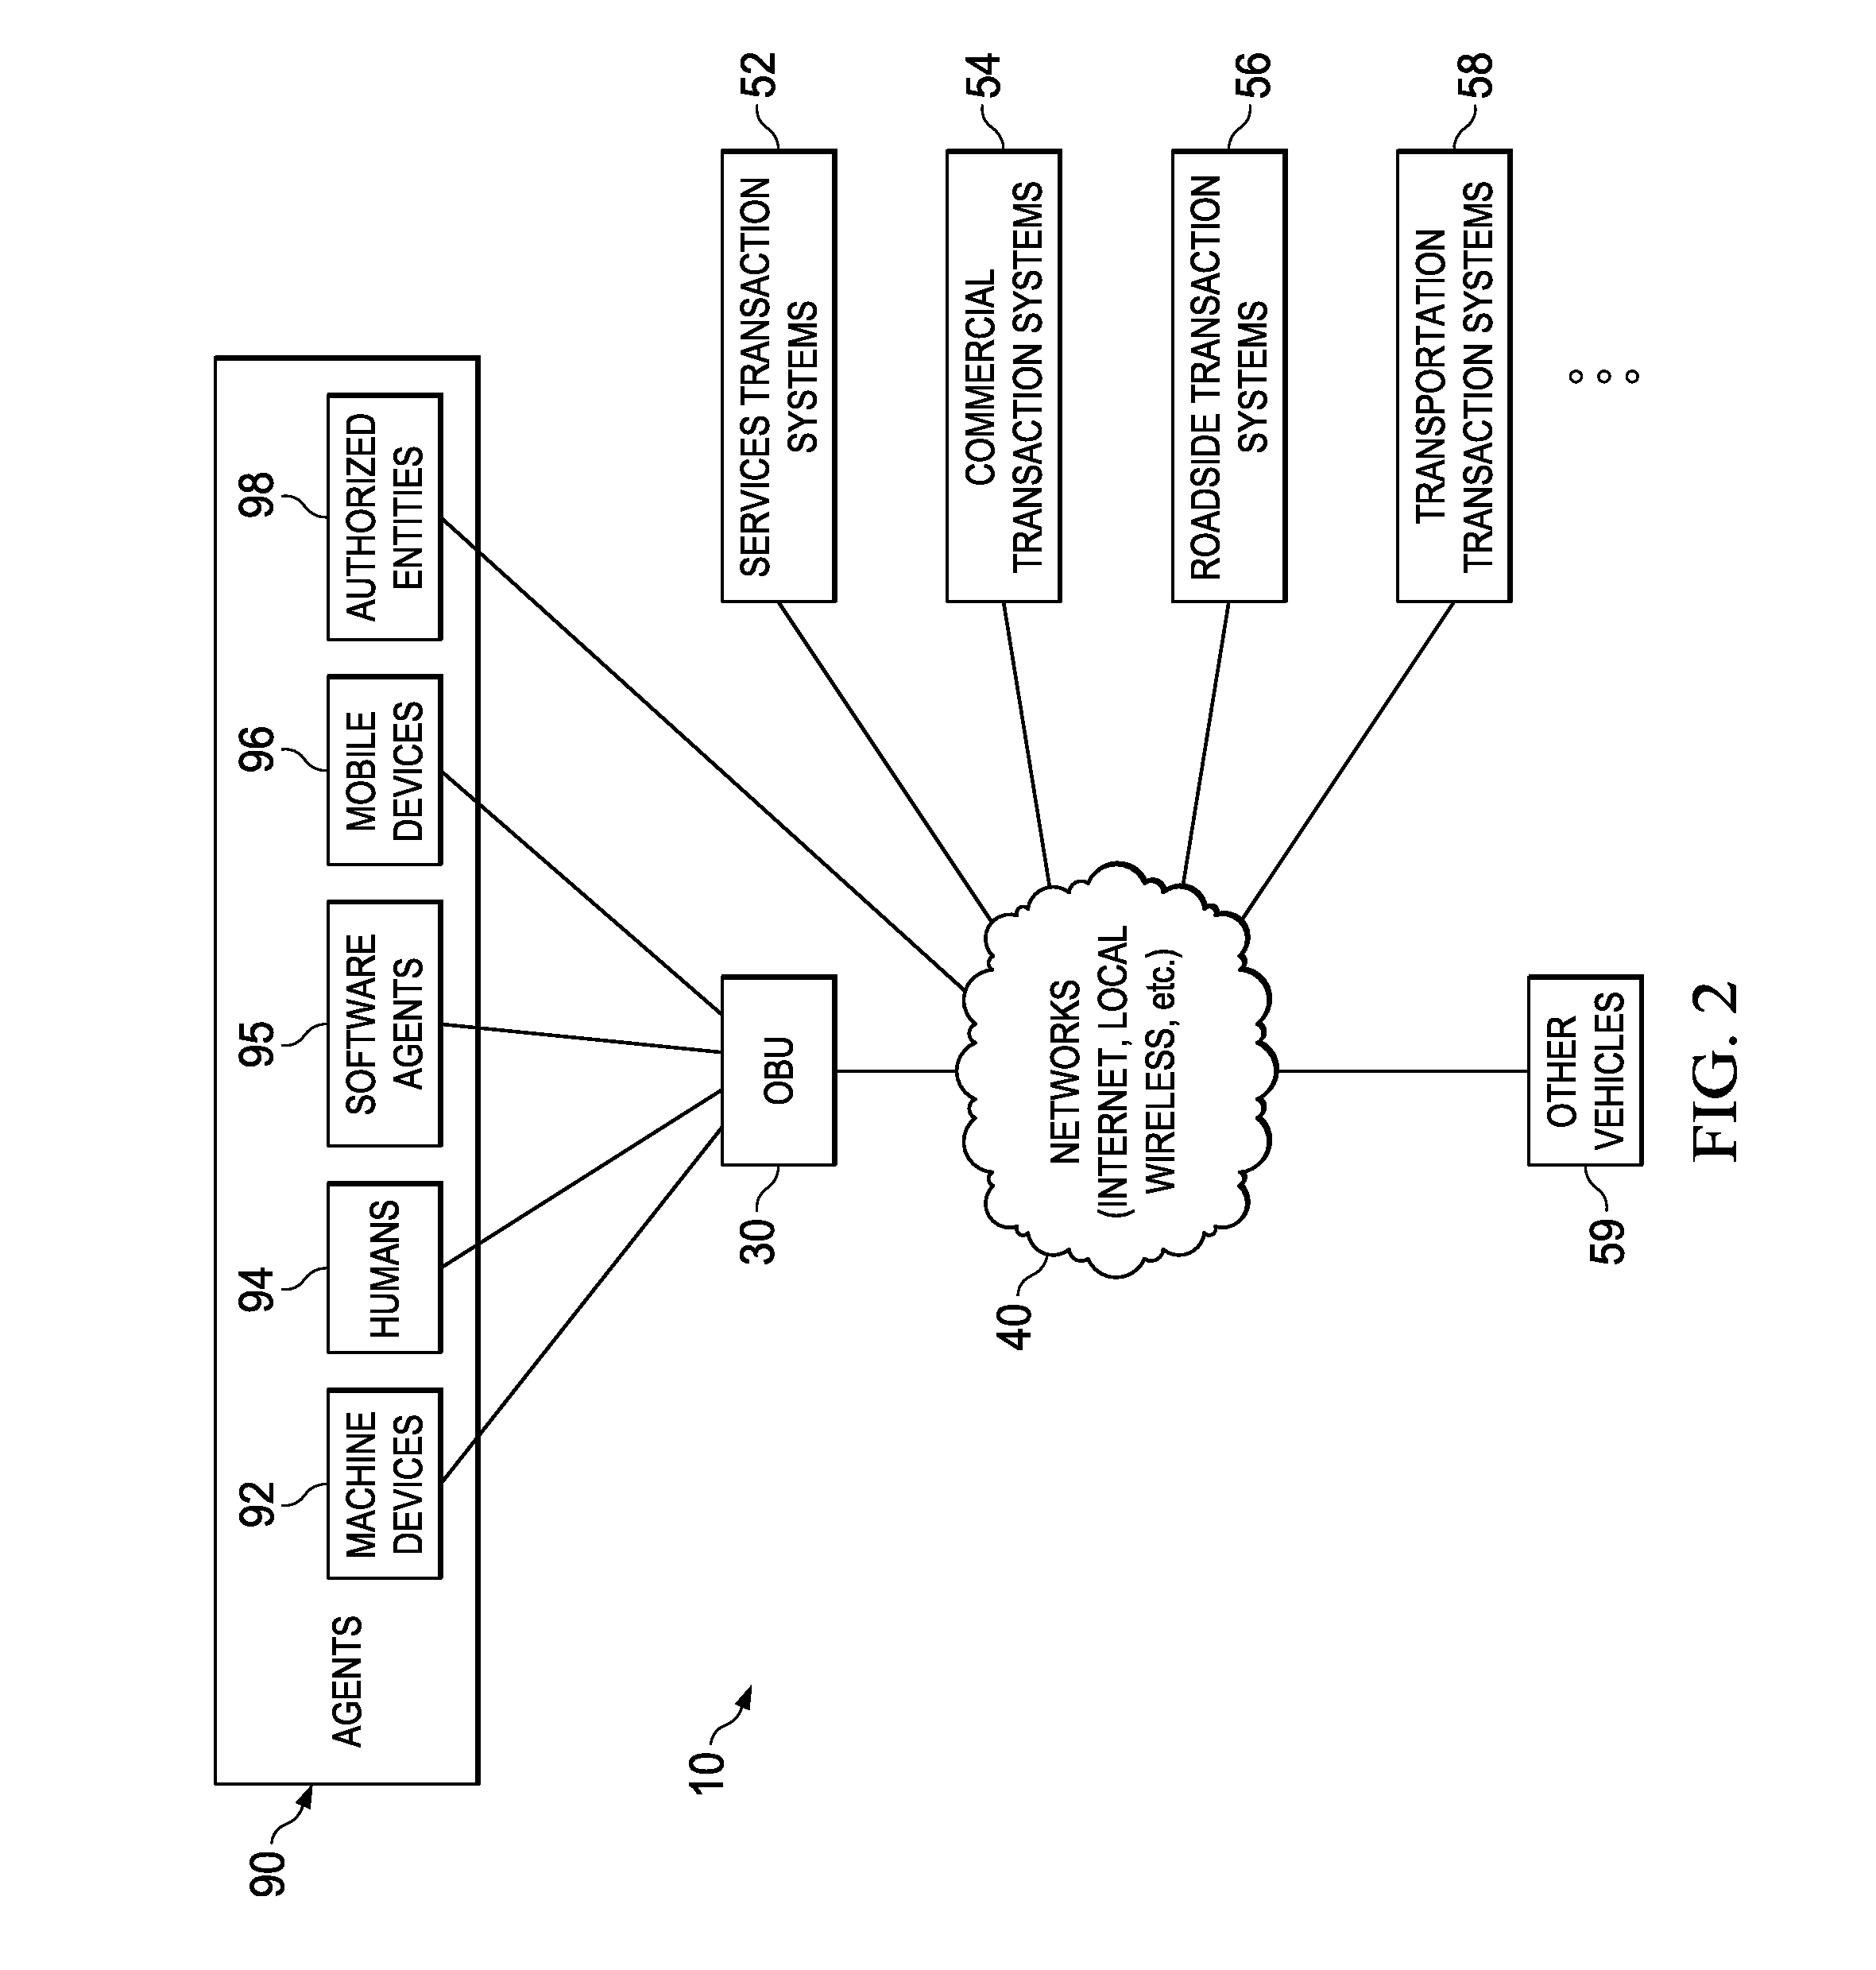 System and method for enabling secure transactions using flexible identity management in a vehicular environment